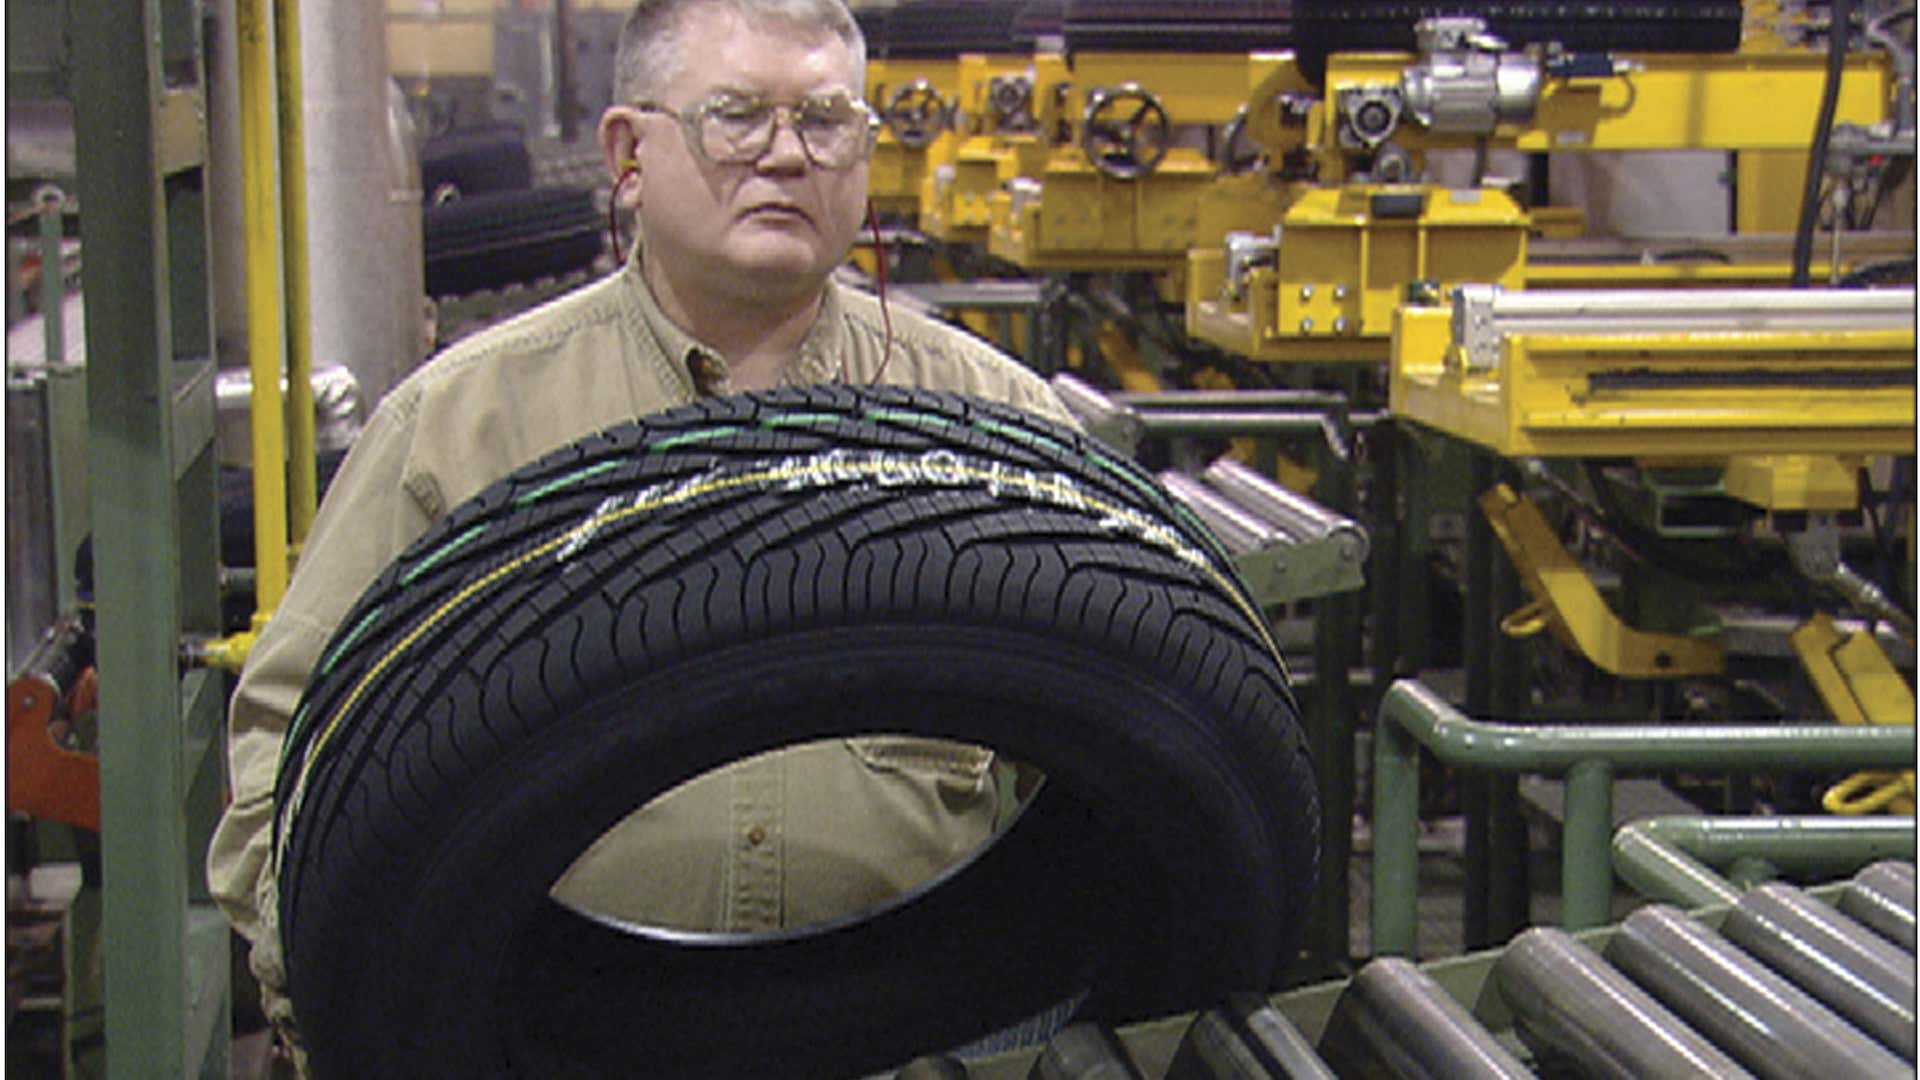 Tire manufacturing requires a human touch, despite high levels of automation.